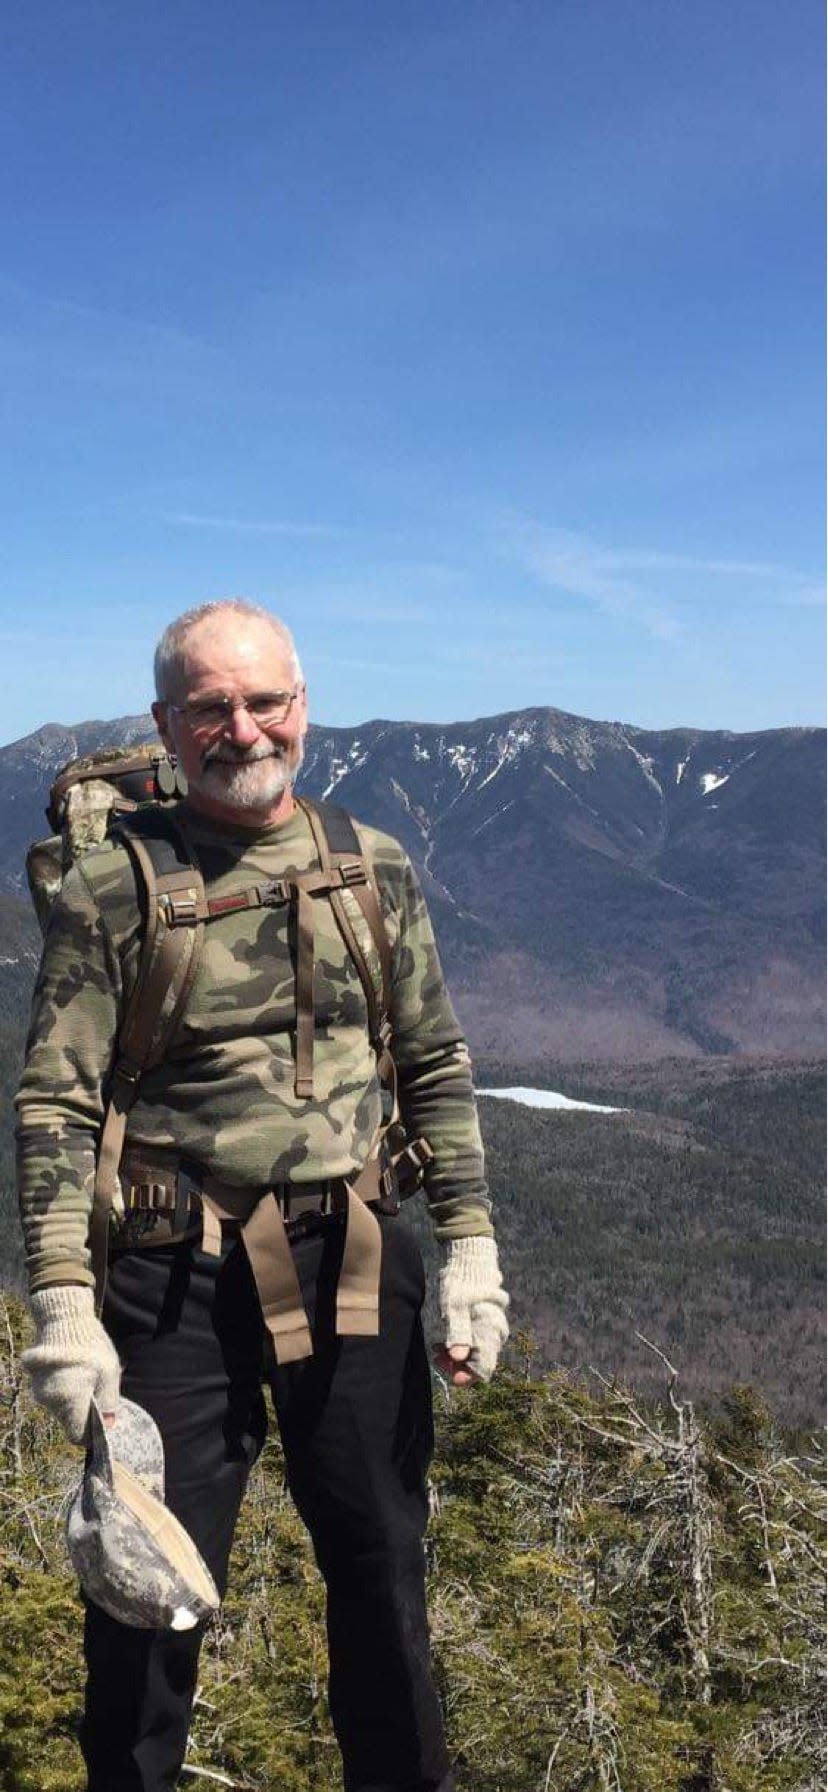 Dave Manca of Templeton will begin a solo hike of the Appalachian Trail in March. He's making the trek to raise money for the Tunnel to Towers Foundation.